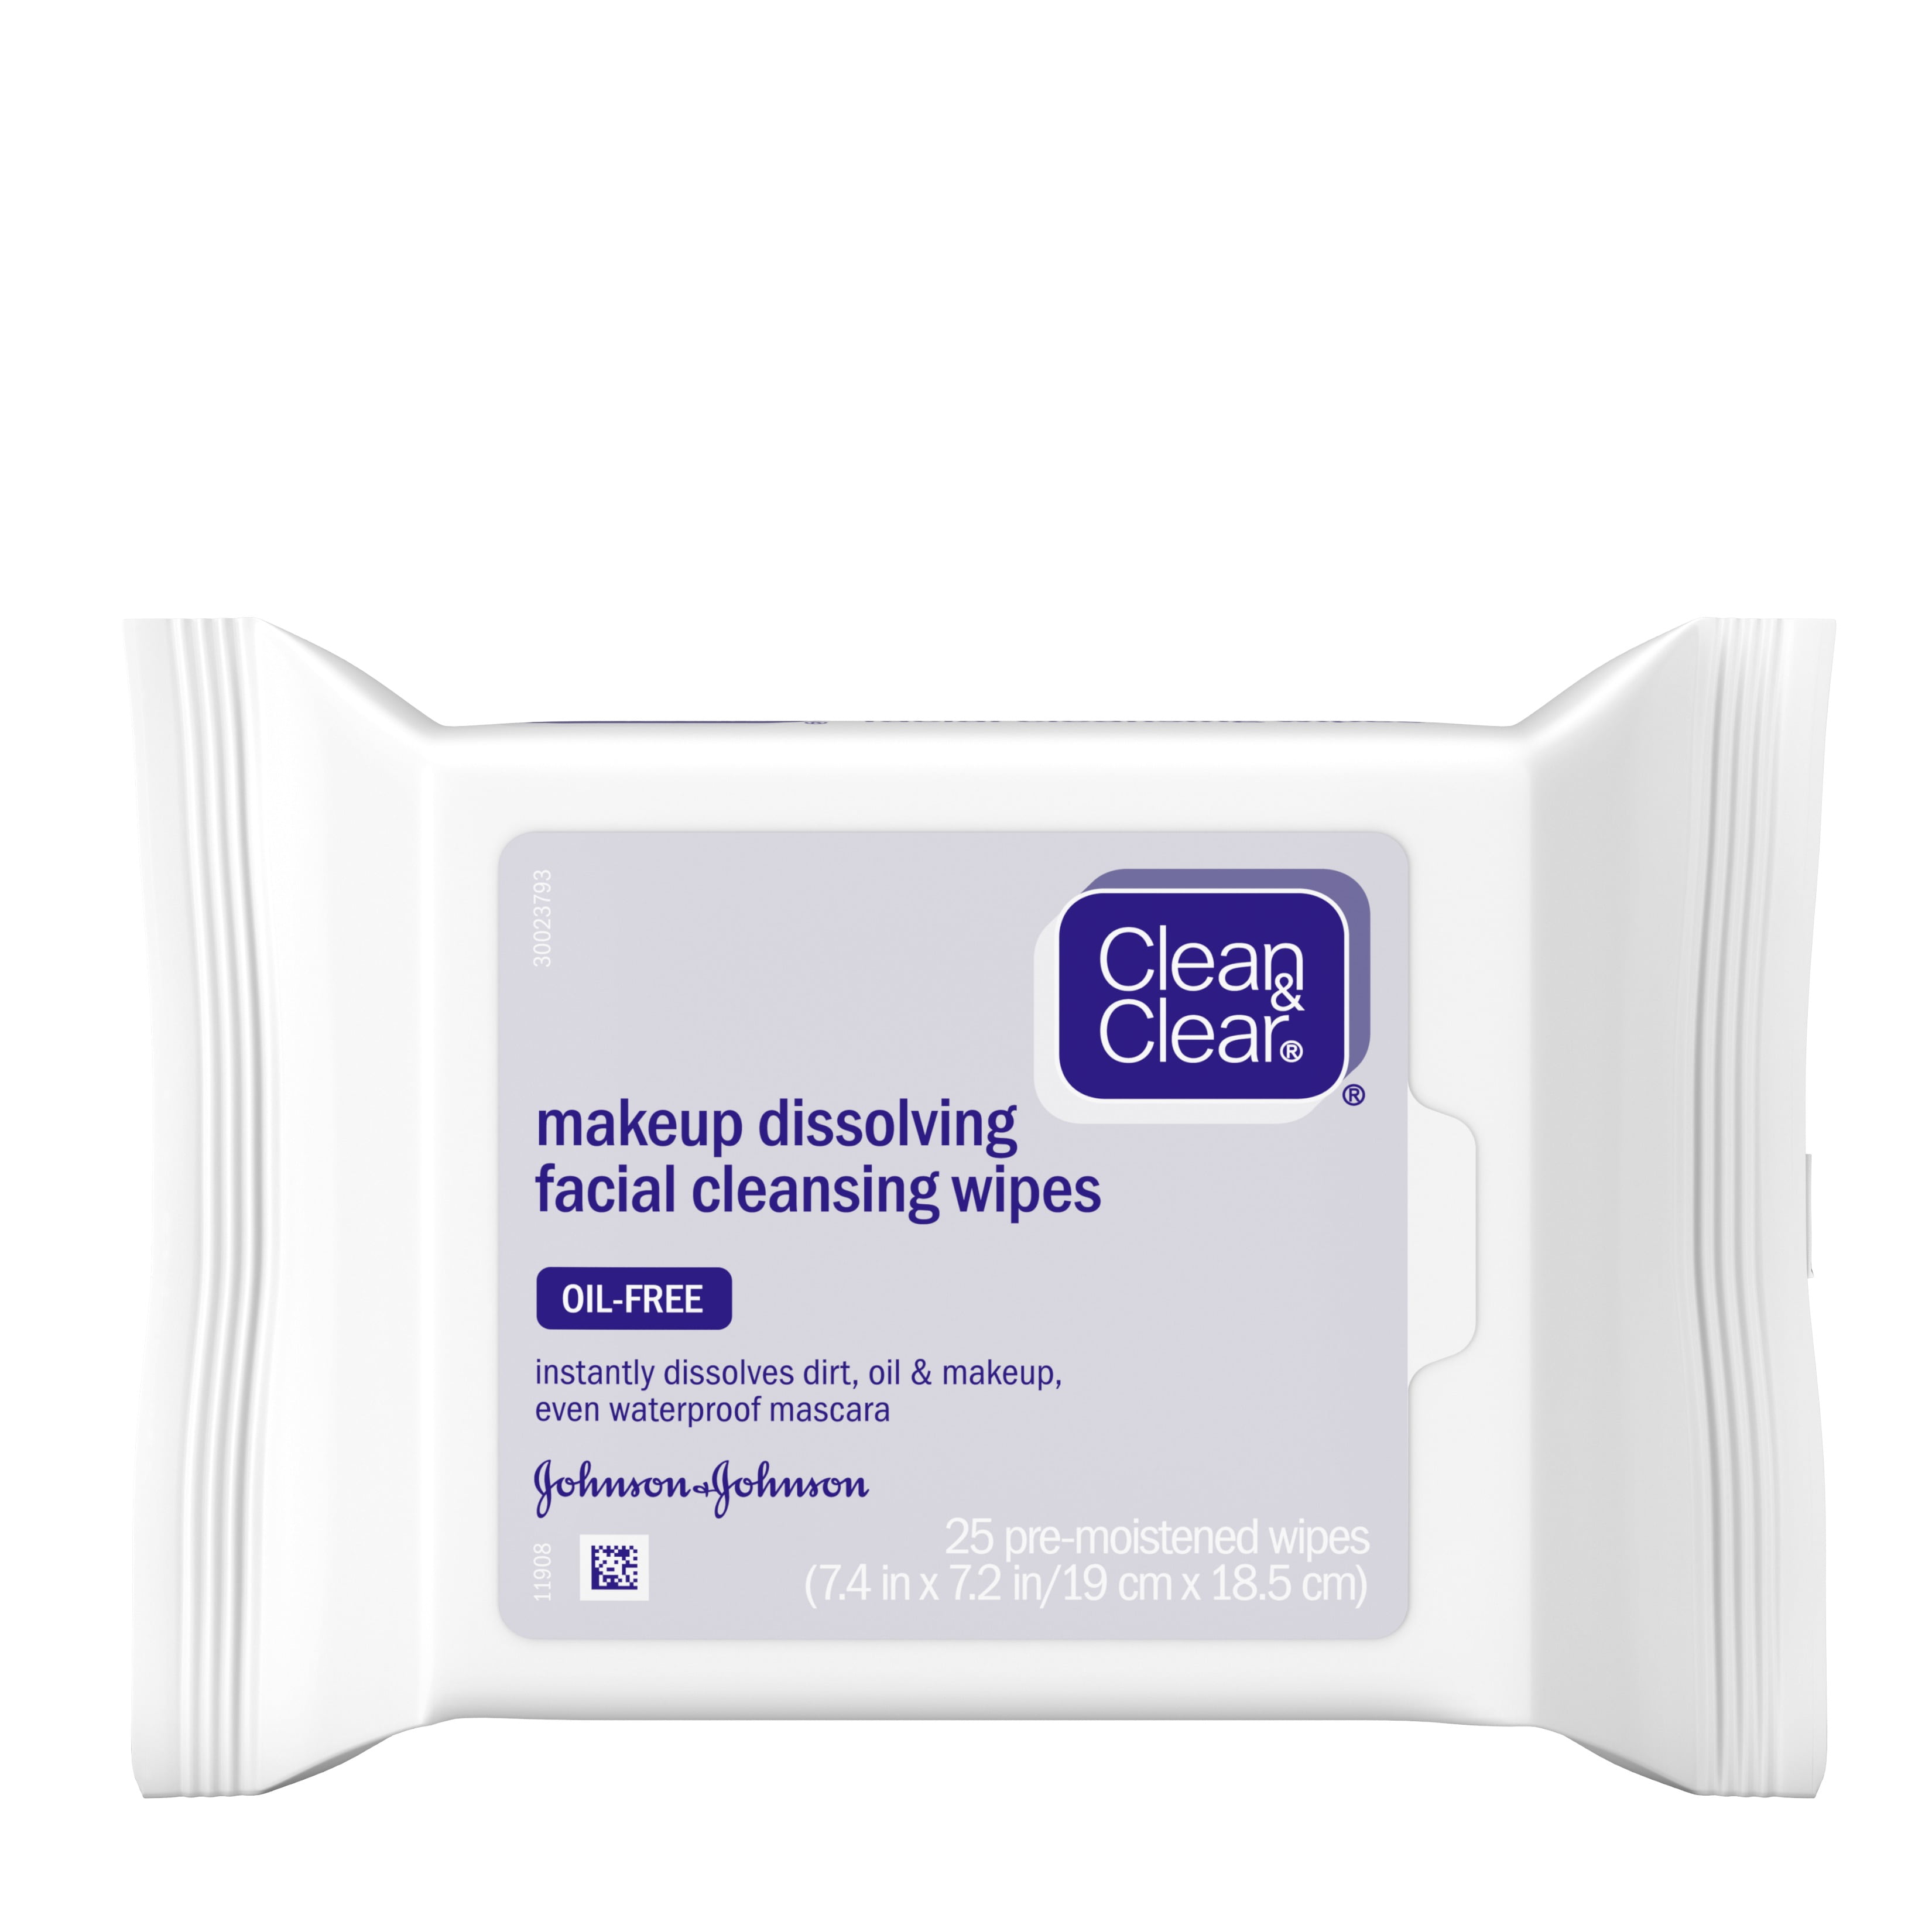 Monograph bryder daggry unse Clean & Clear Oil-Free Makeup Dissolving Facial Cleansing Wipes 25 ct. -  Walmart.com